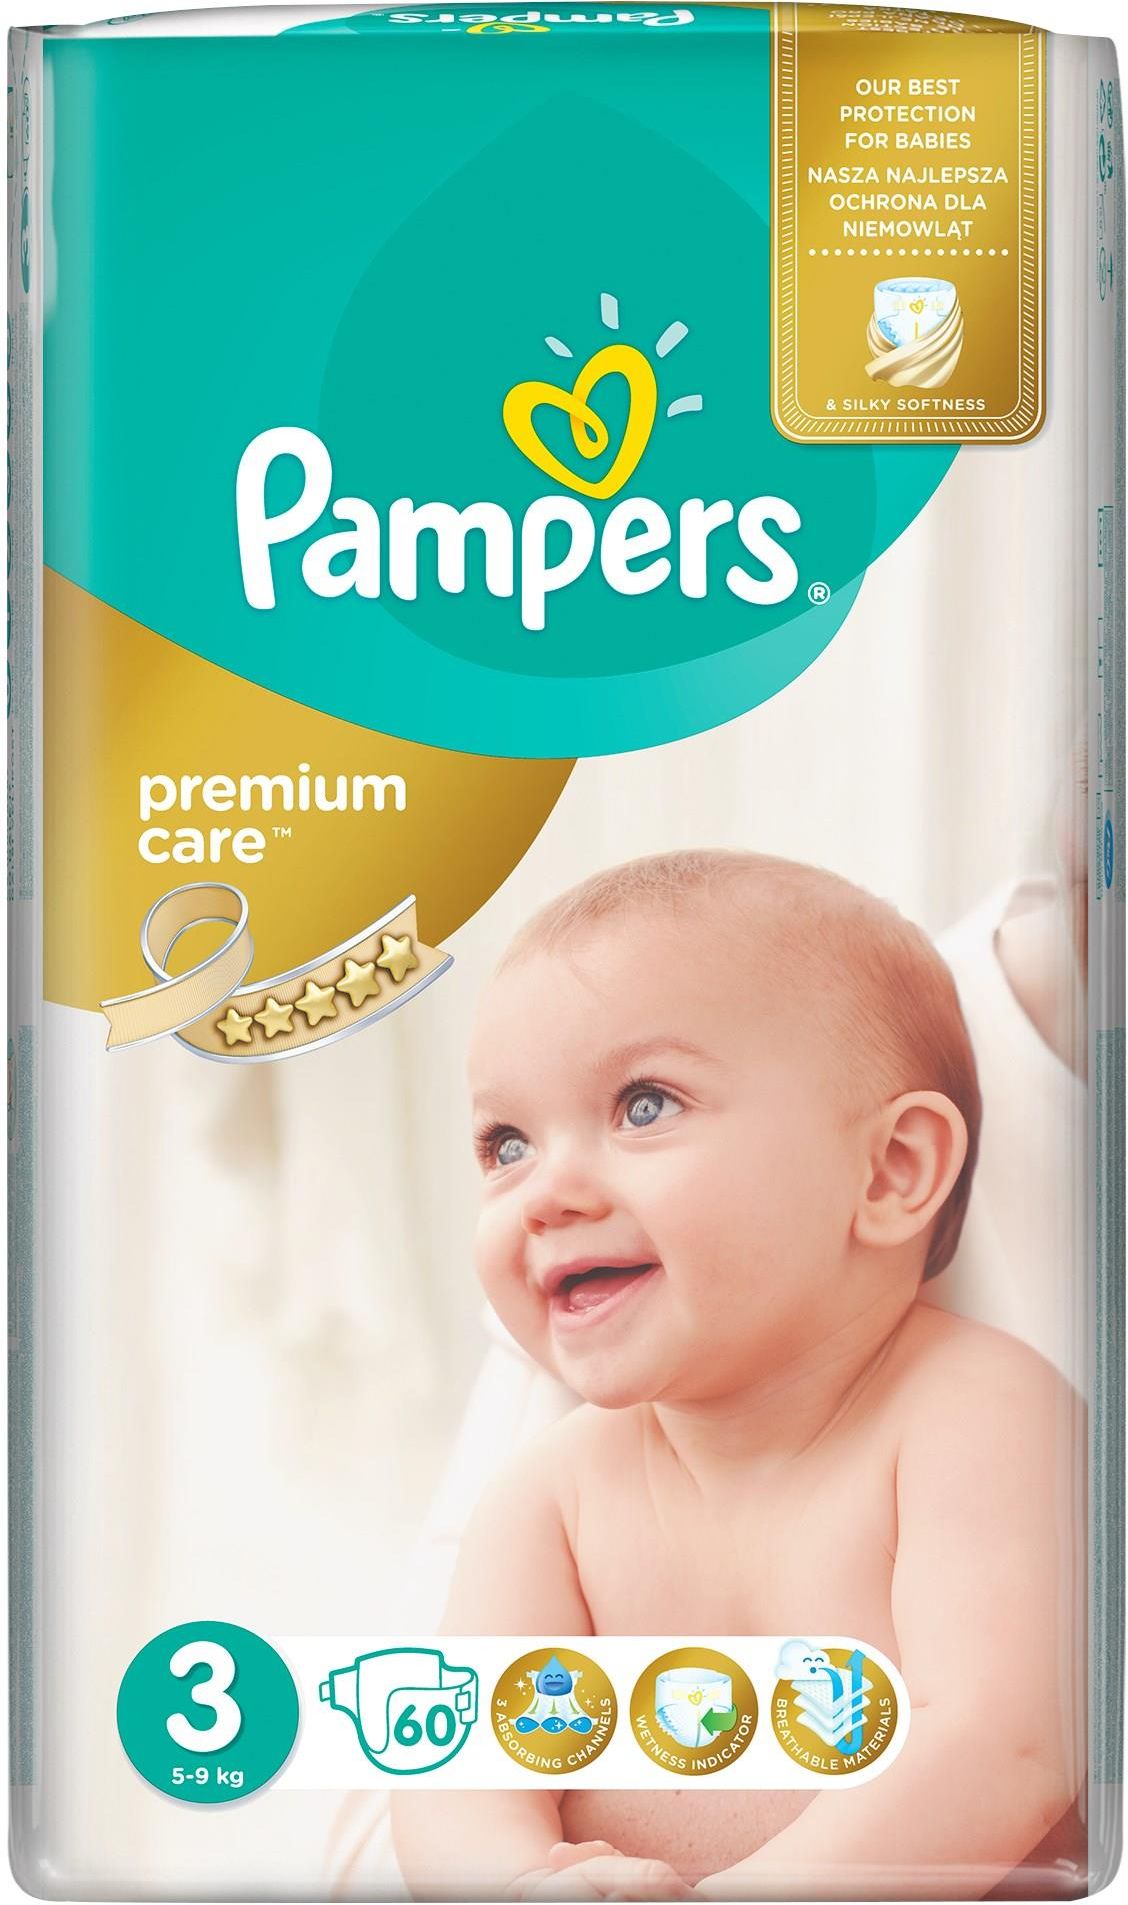 pufies czy pampers